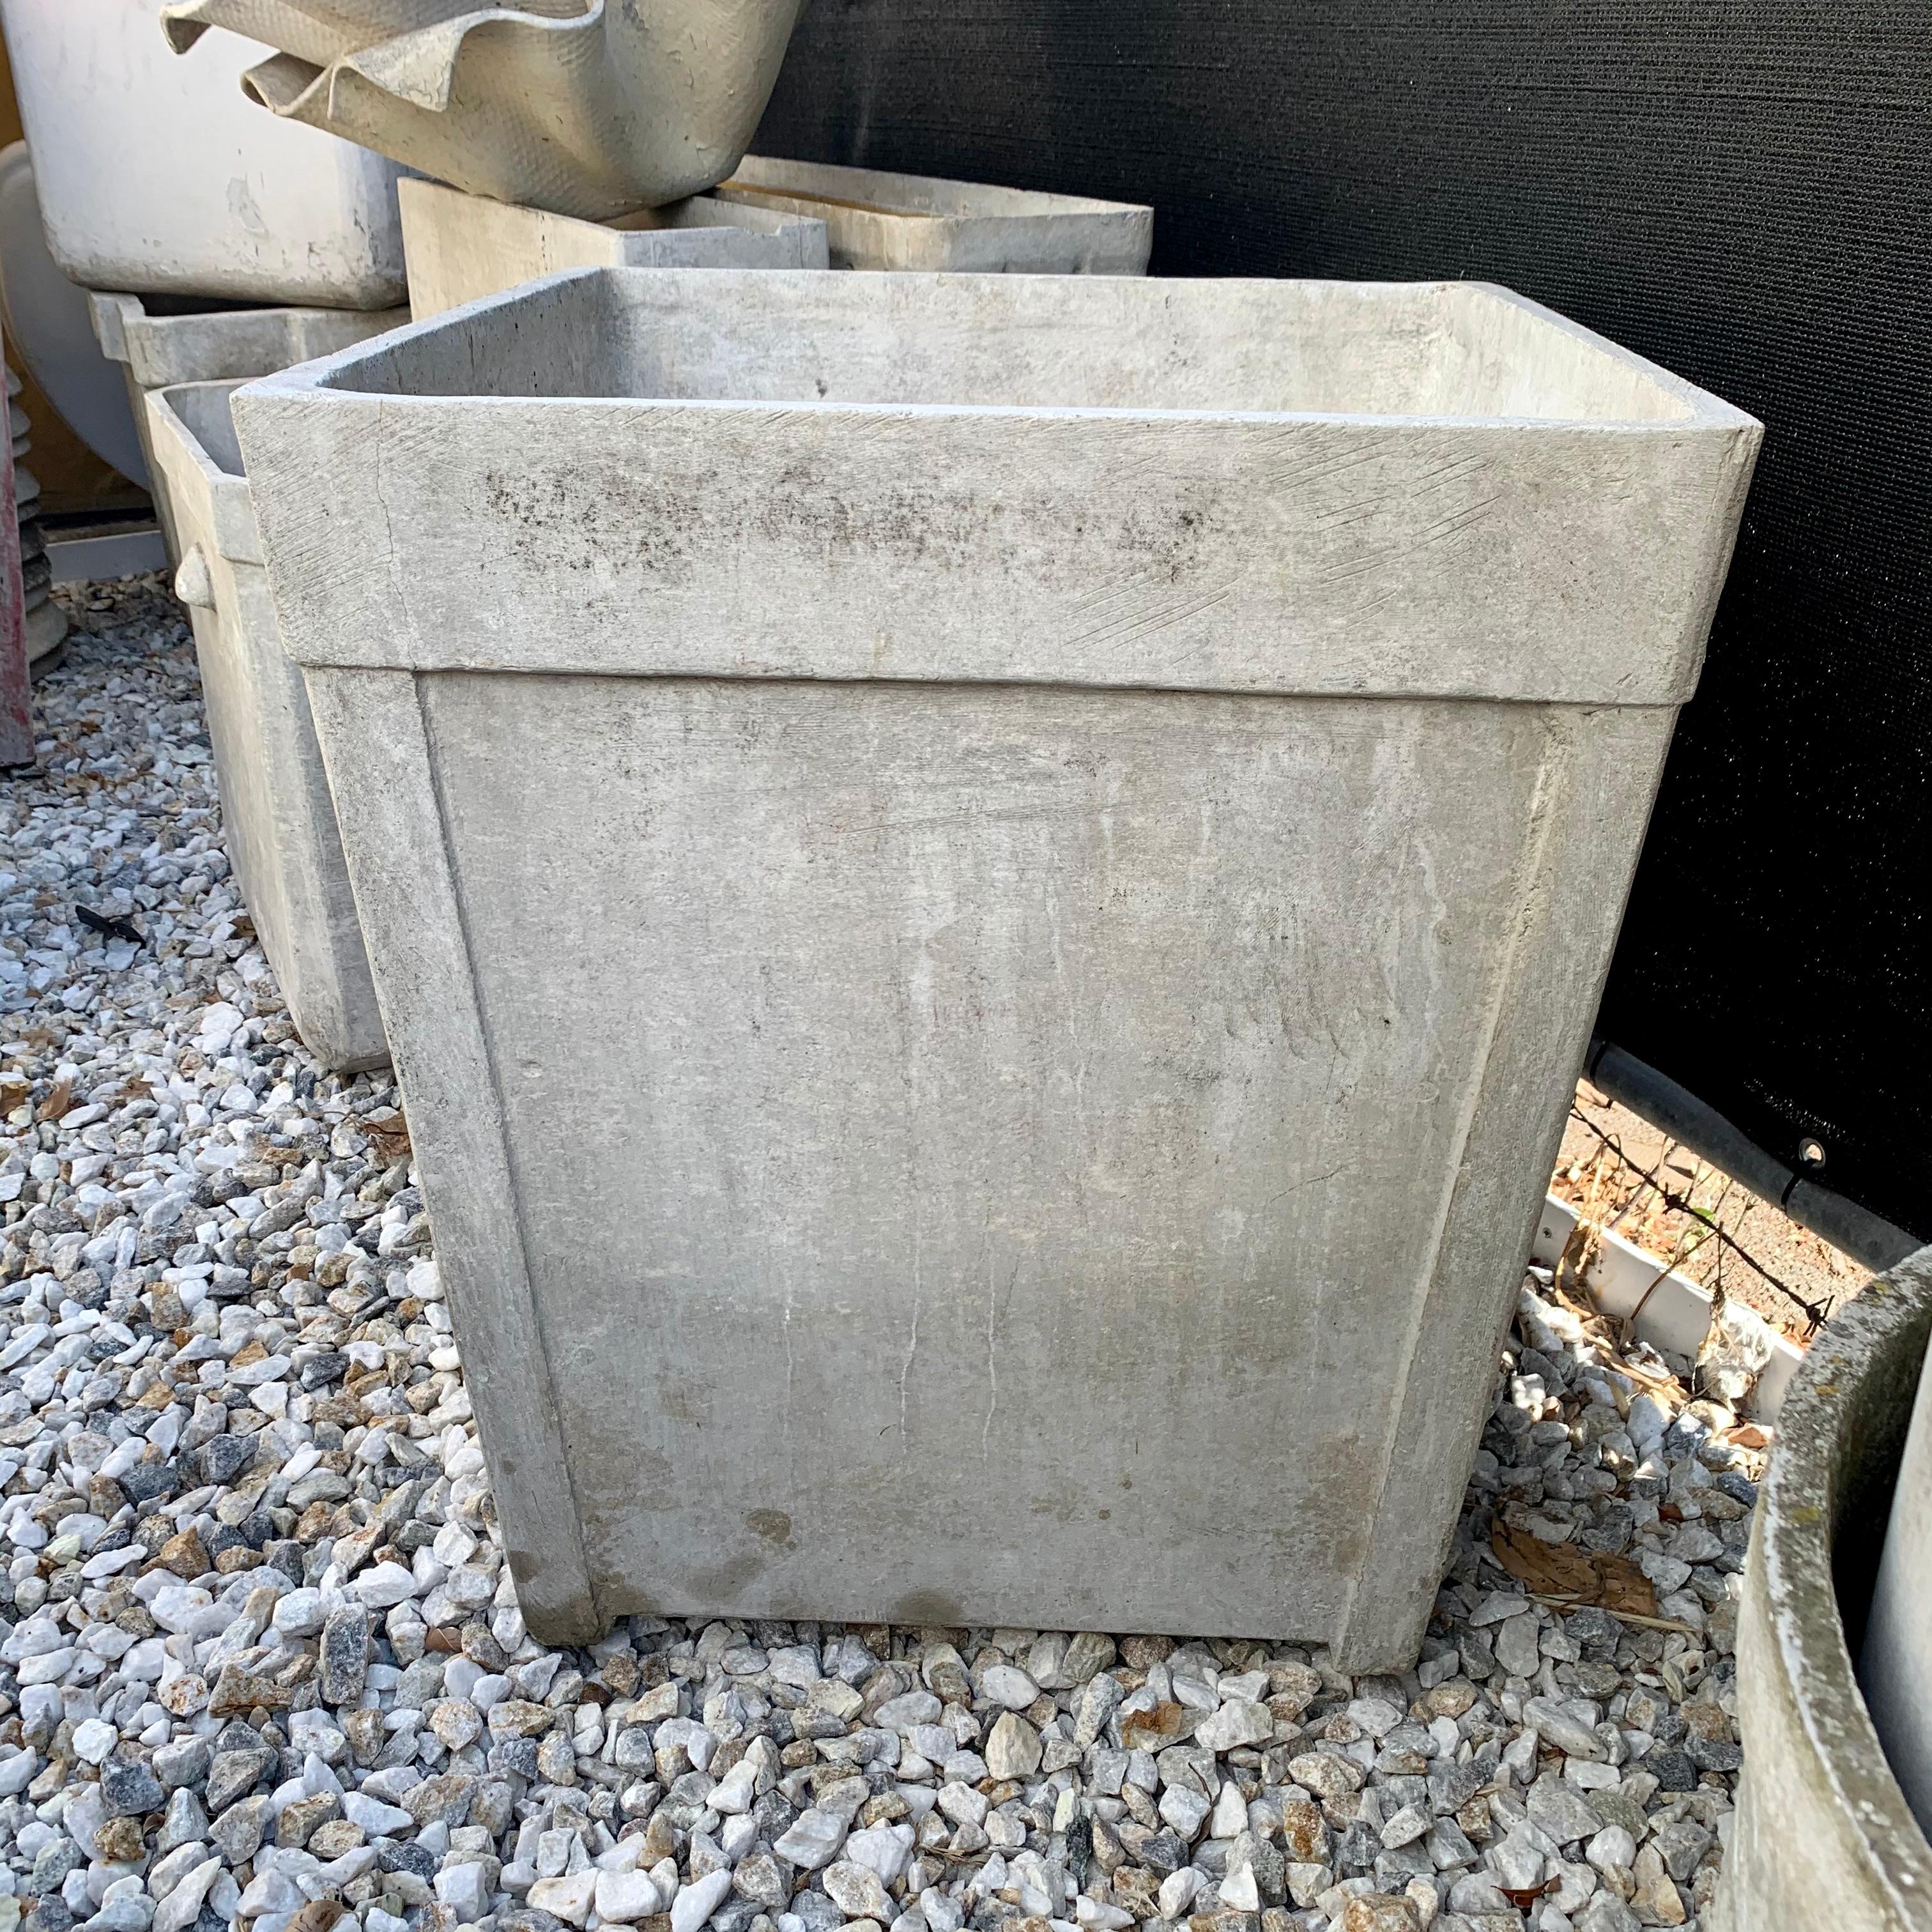 Massive concrete tree planter by Willy Guhl. Tall planter with 4 post feet raising the planter slightly off the ground. Very good condition. Perfect for a large plant or tree, indoors or out.



 